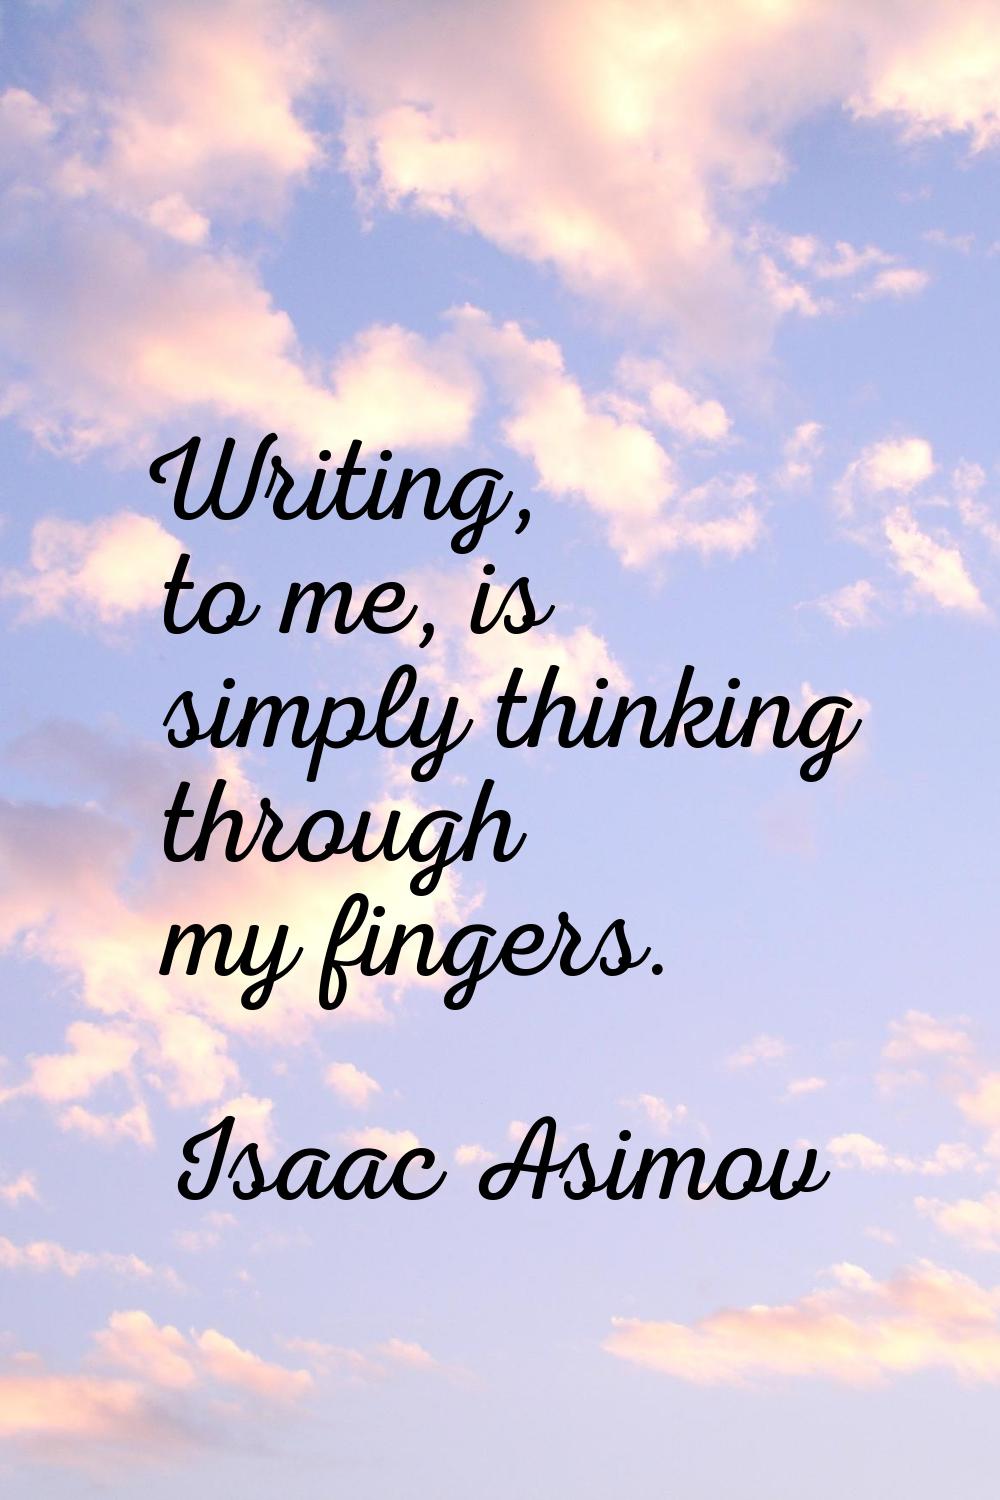 Writing, to me, is simply thinking through my fingers.